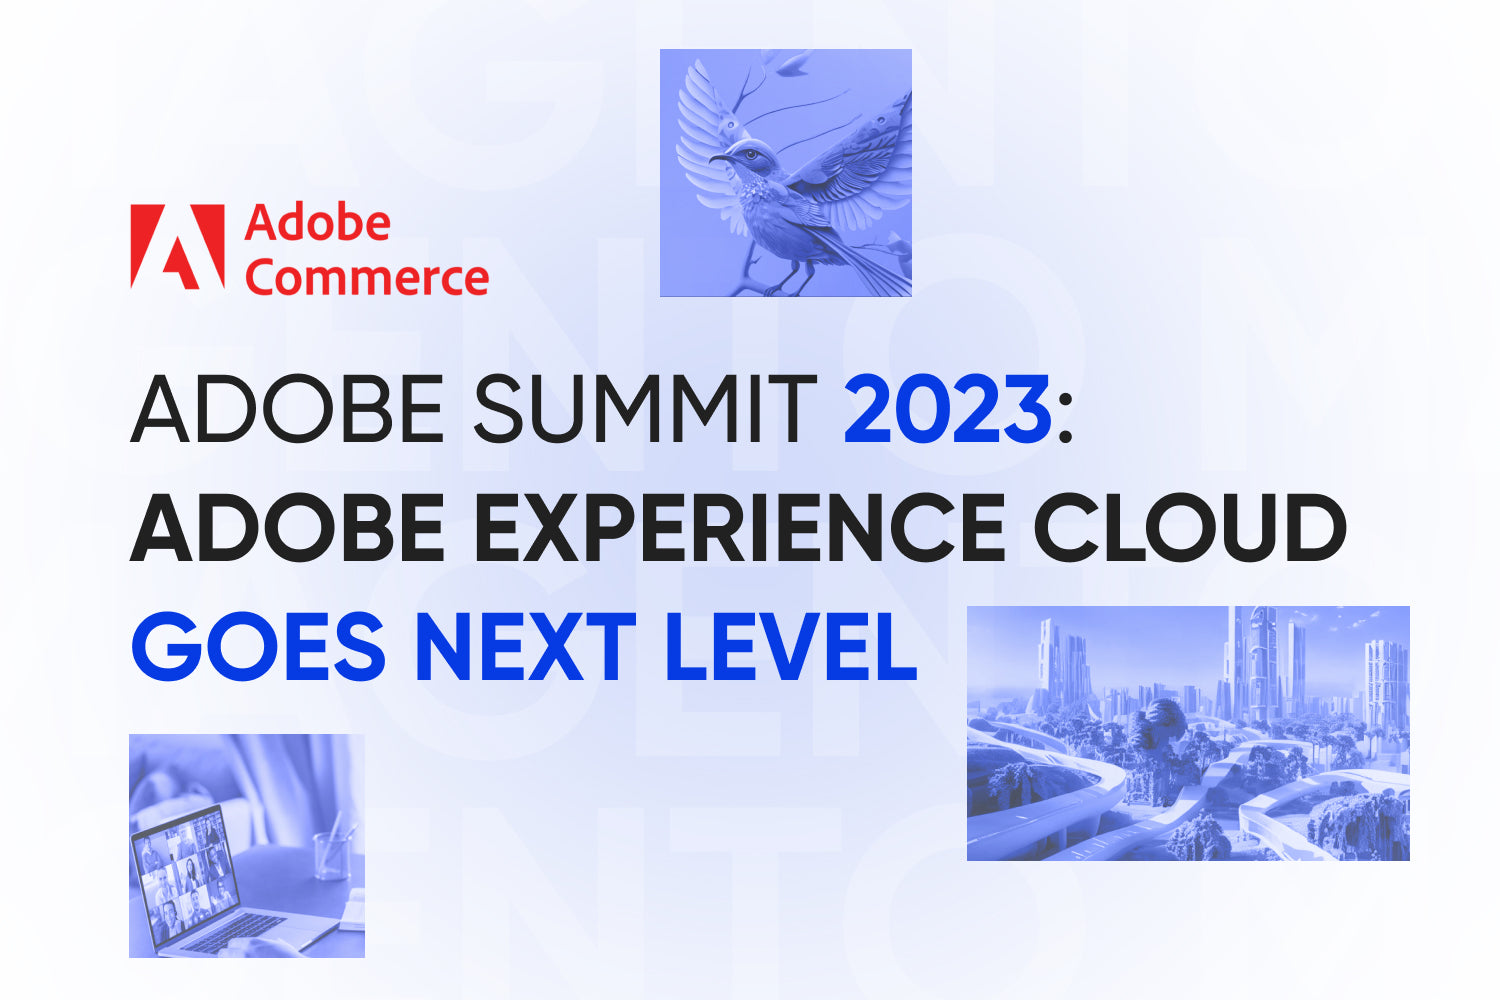 Adobe Summit 2023: a look at the latest Innovations in Adobe Experience Cloud